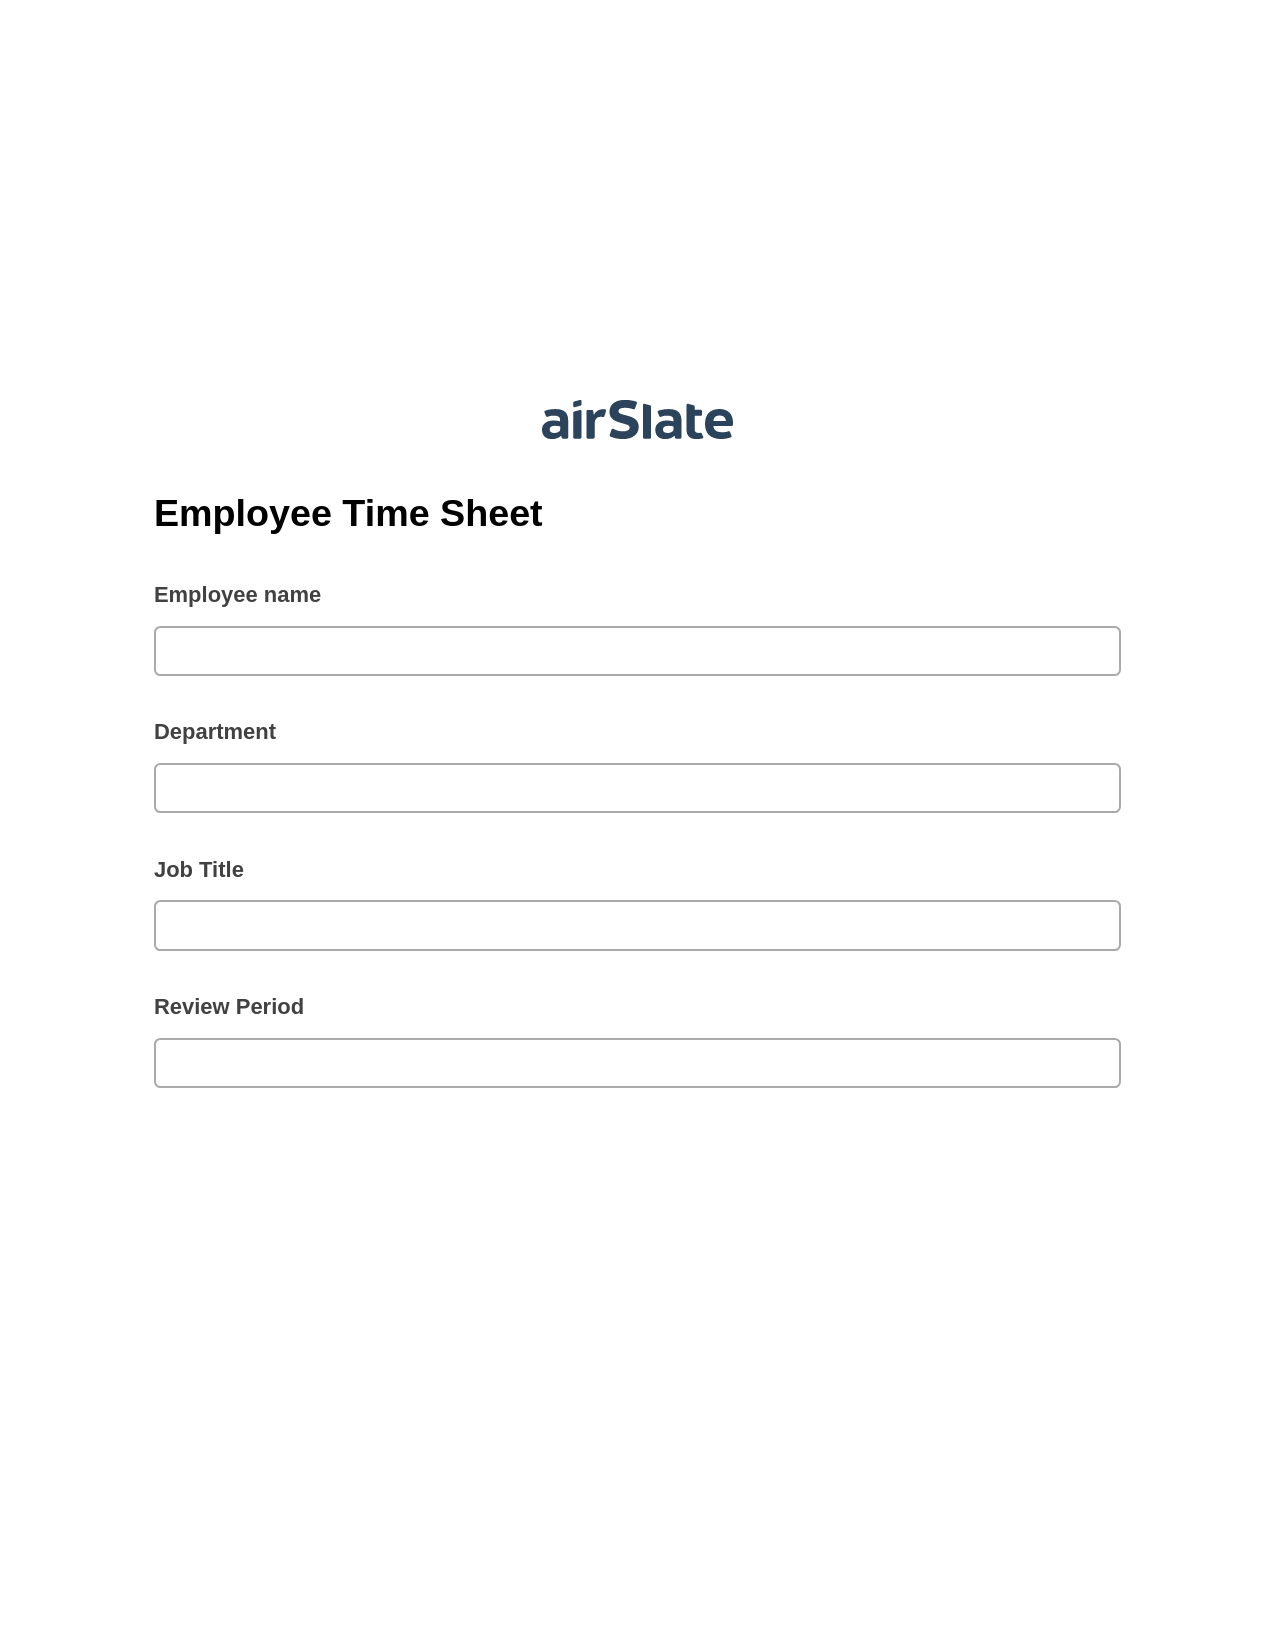 Multirole Employee Time Sheet Pre-fill Dropdowns from Airtable, Update Audit Trail Bot, Archive to SharePoint Folder Bot